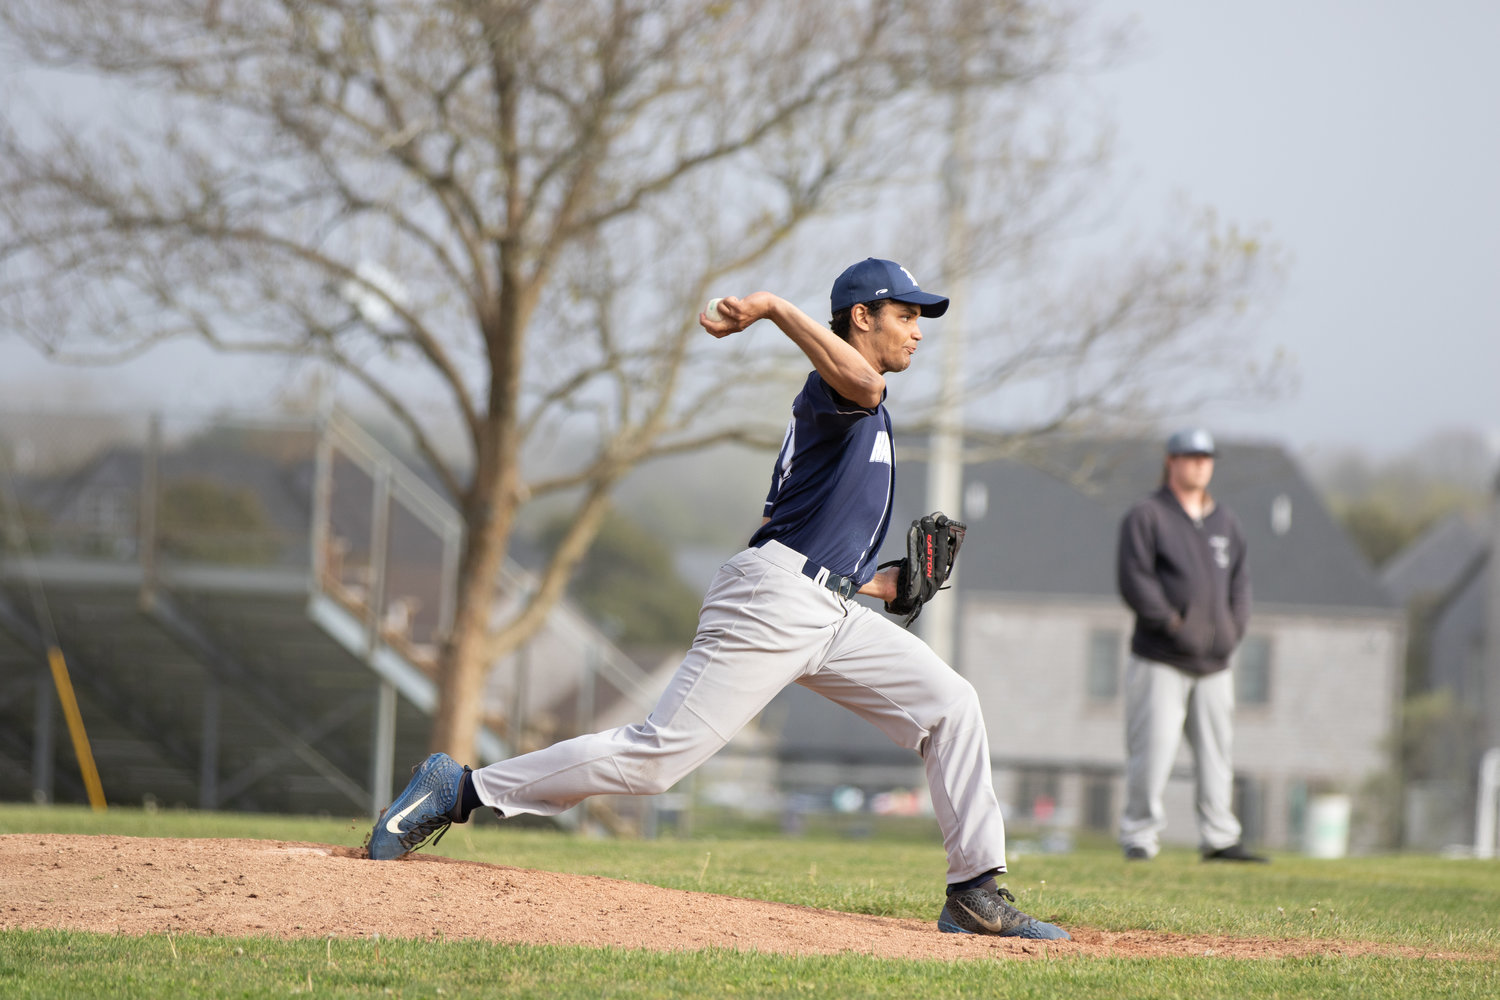 Fabian Acosta-Martinez on the mound for the Whalers